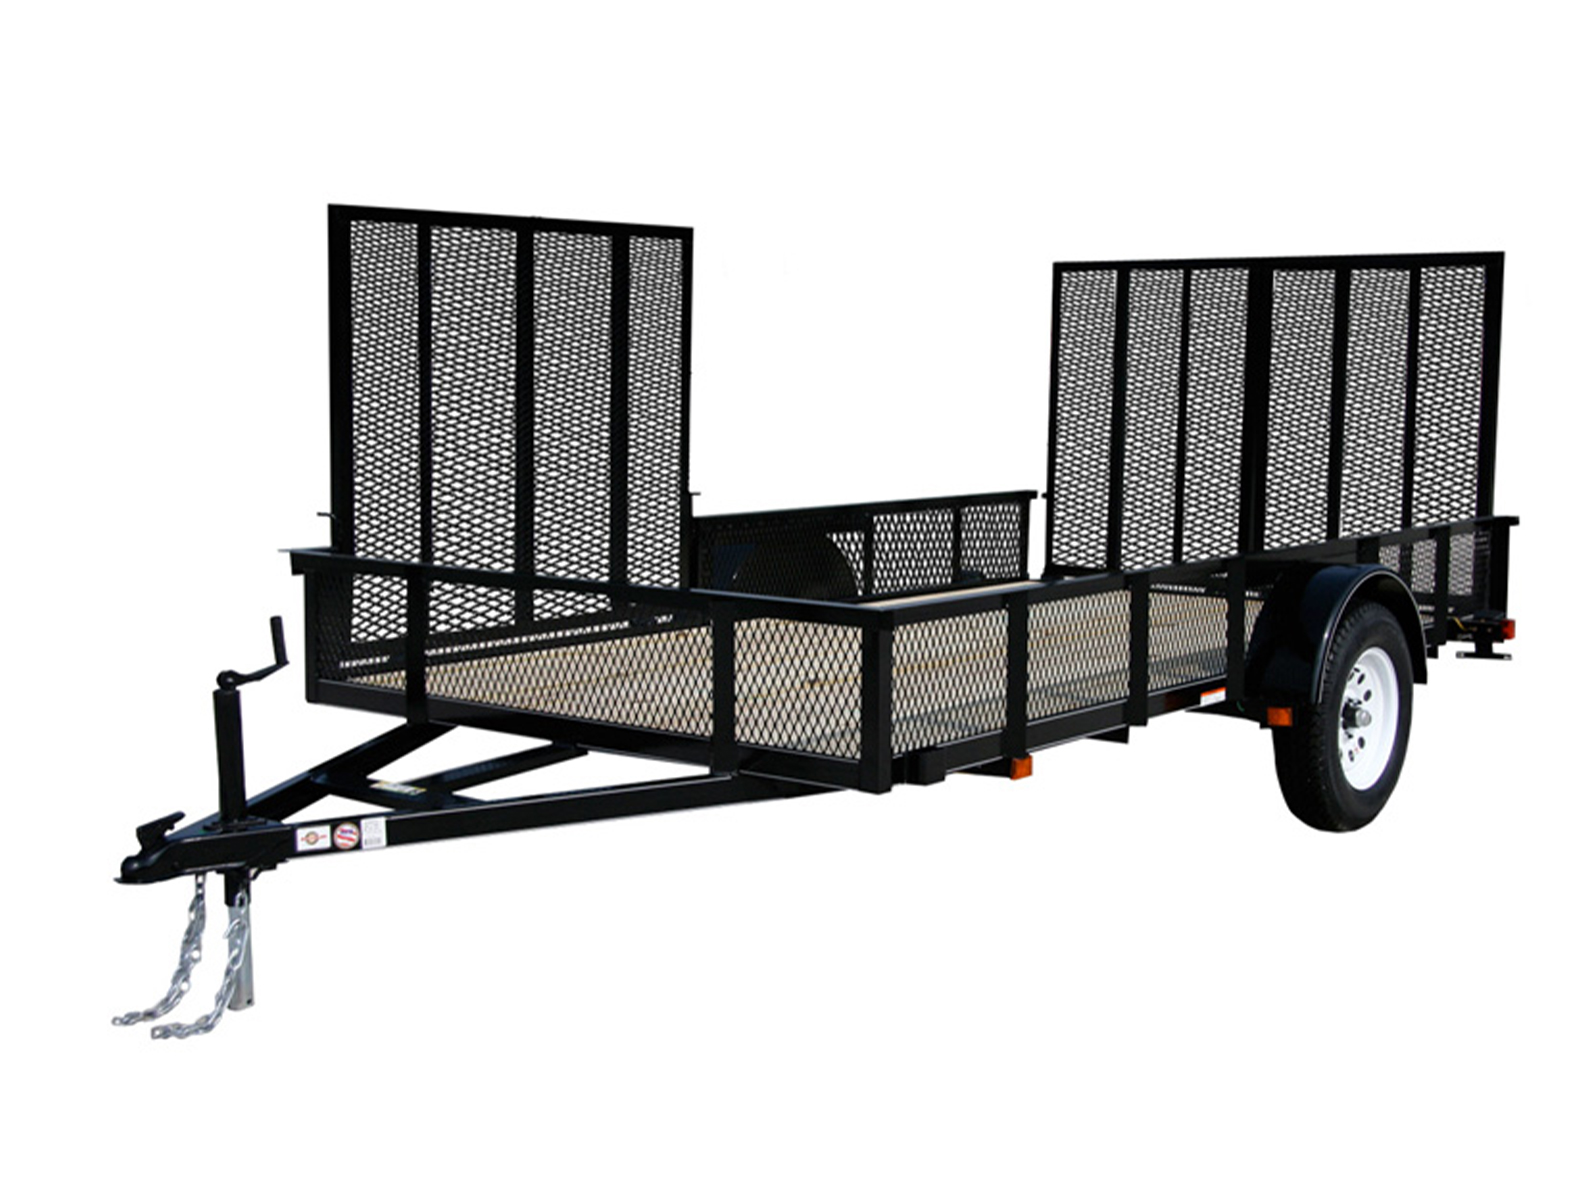 3K ATV Side Load Utility Trailer with wood floor and 2 gates